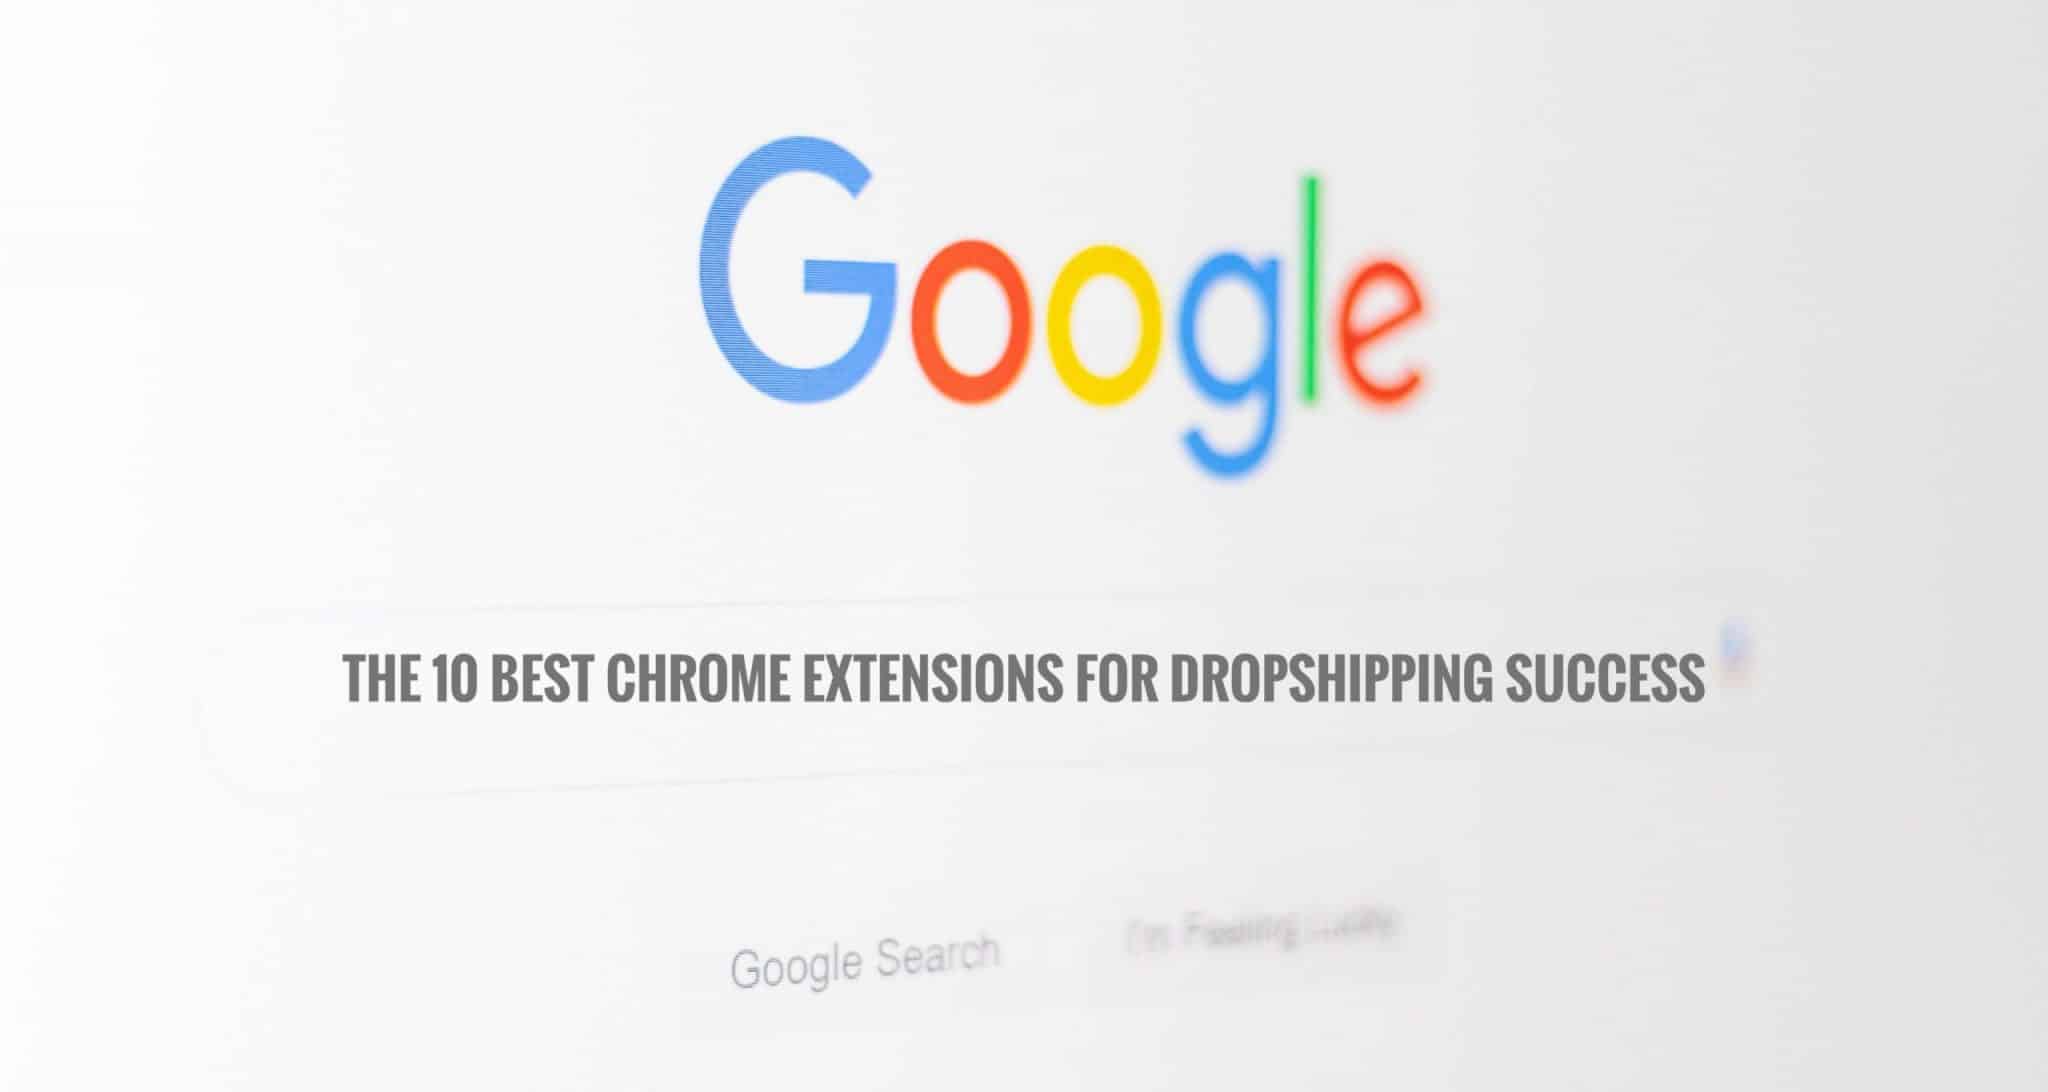 The 10 Best Chrome Extensions for Dropshipping Success